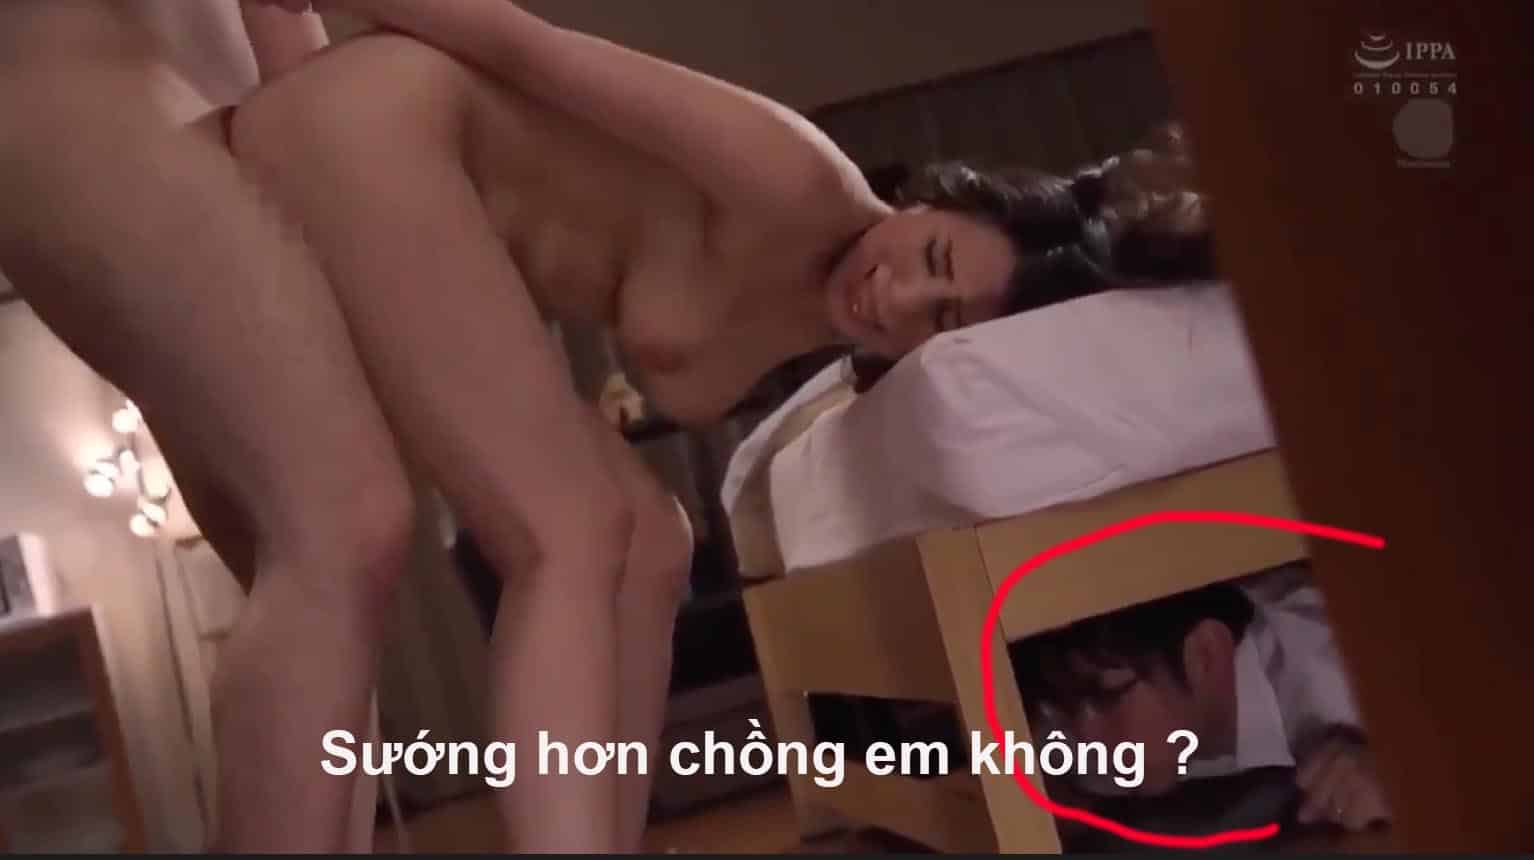 Husband helplessly watches wife being fucked Vietsub